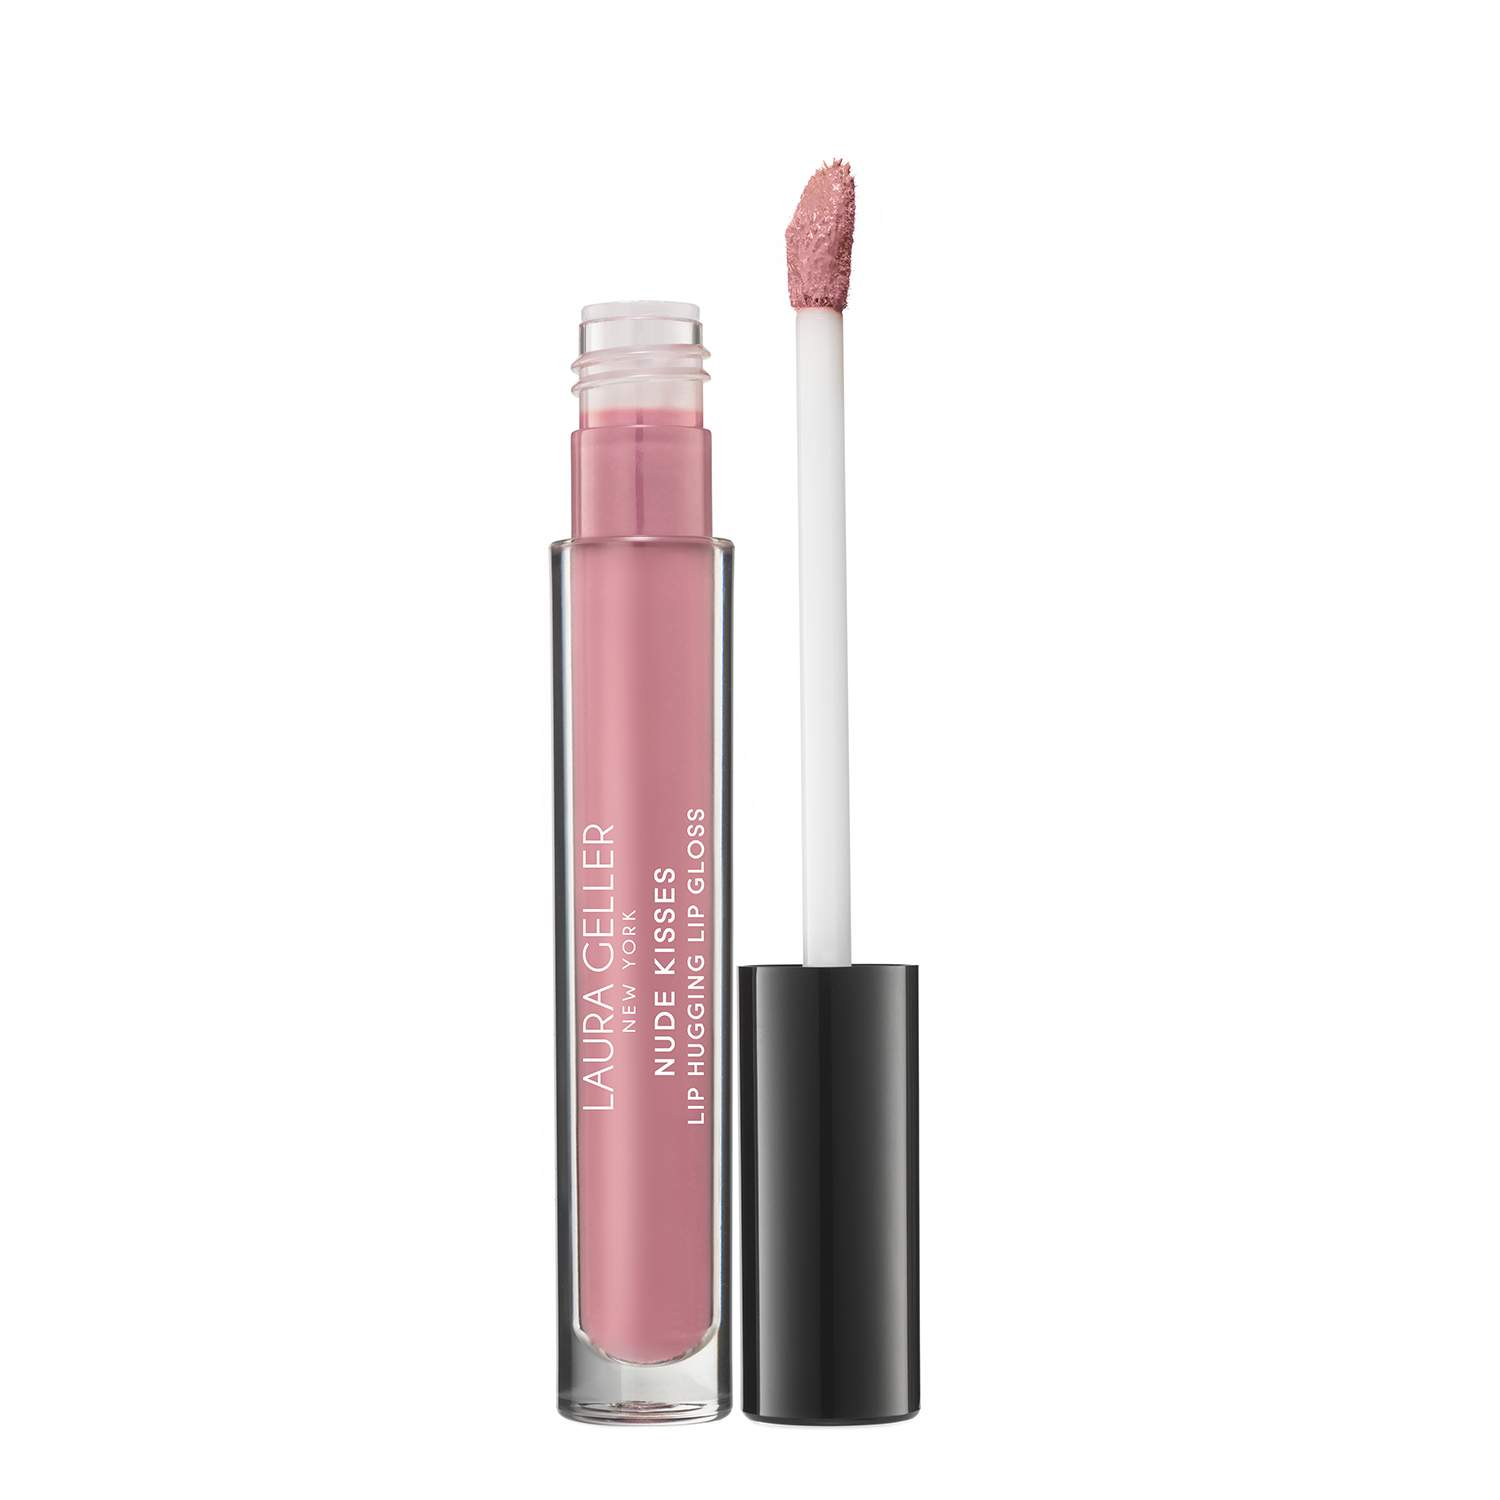 Laura Geller Nude Kisses Lip Hugging Lip Gloss - Barely There